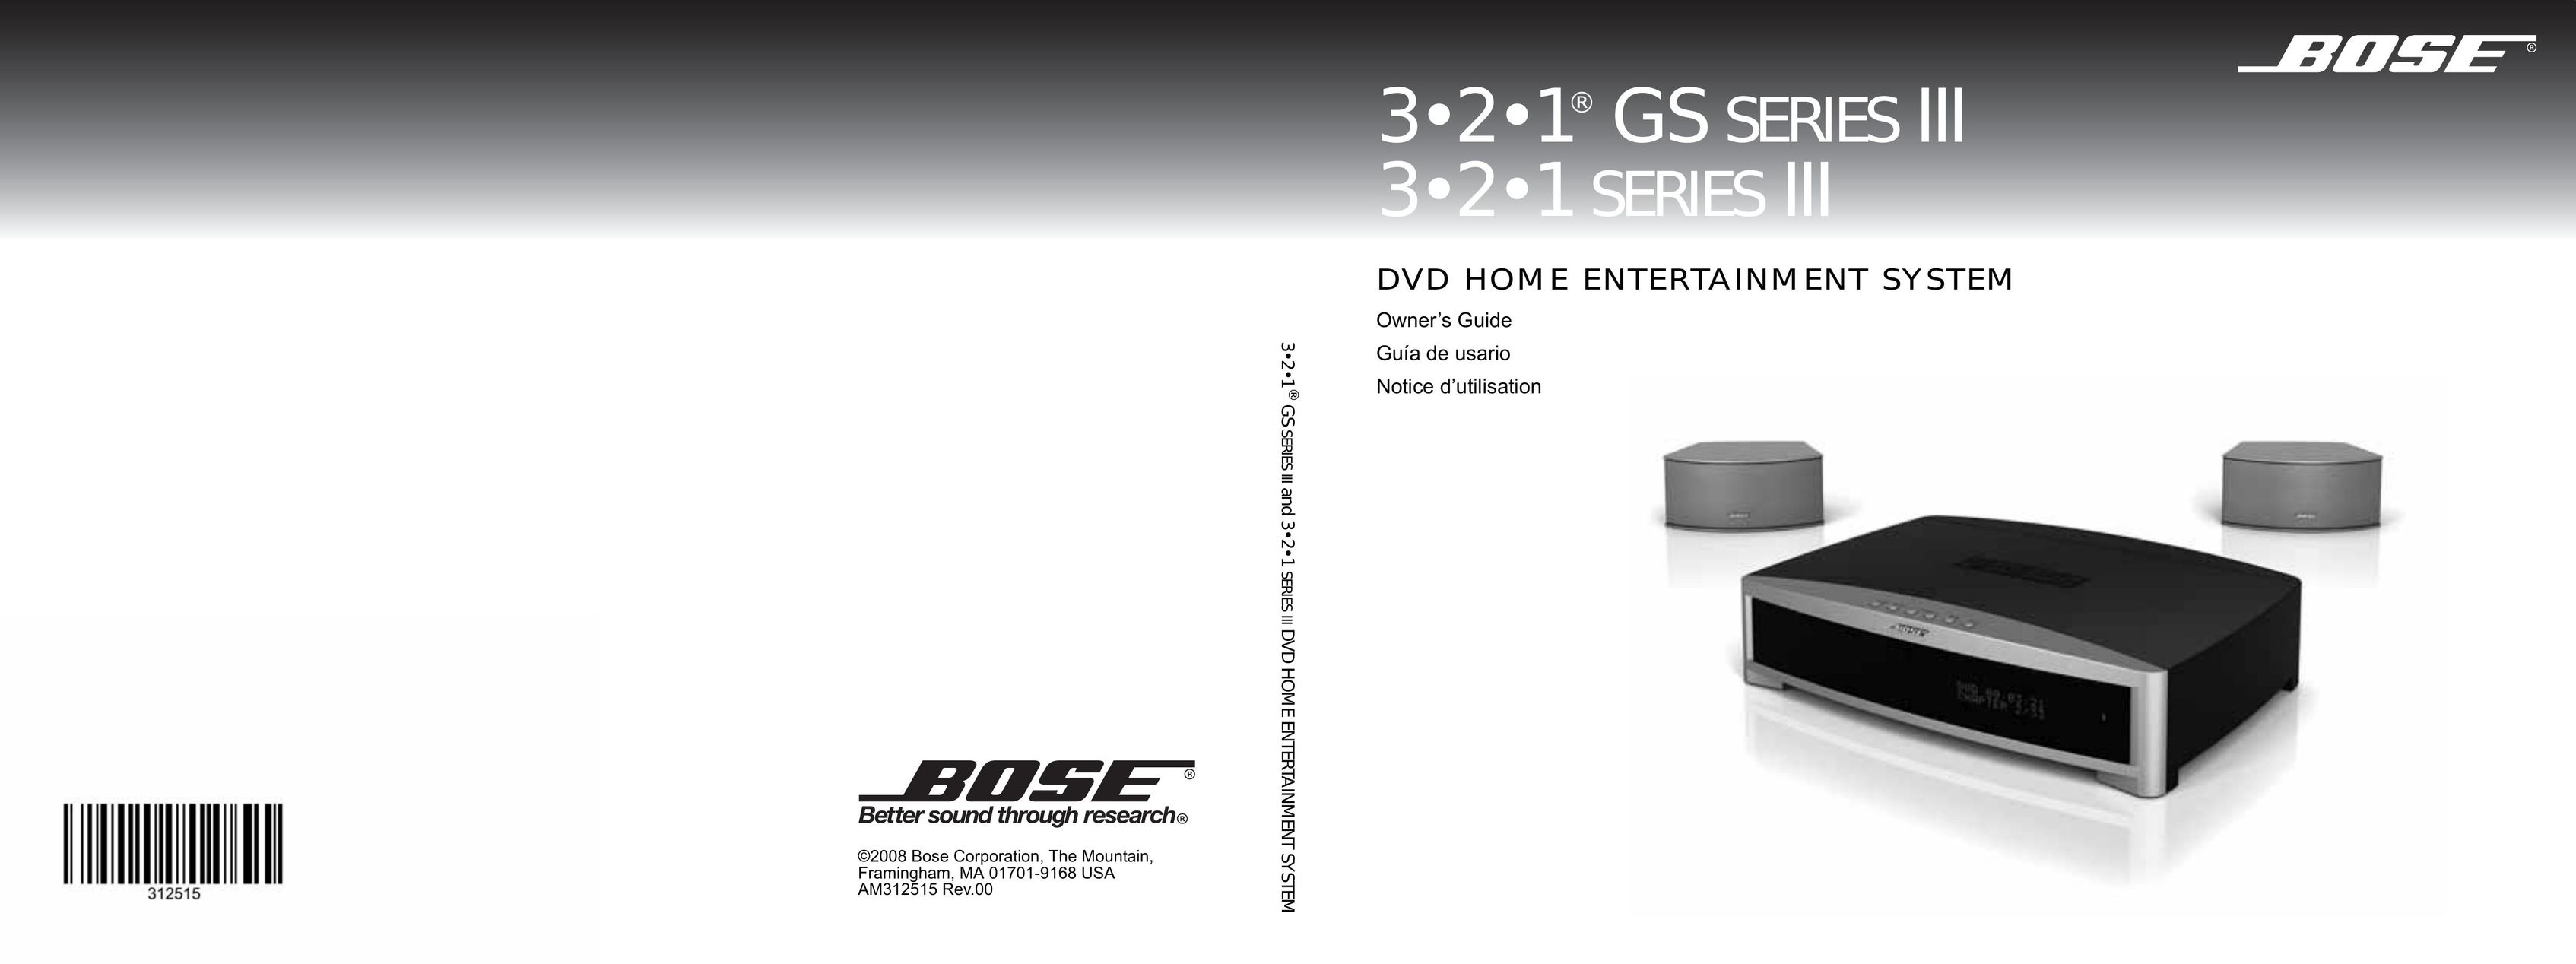 Bose 3.2.1 GS Series III Stereo System User Manual